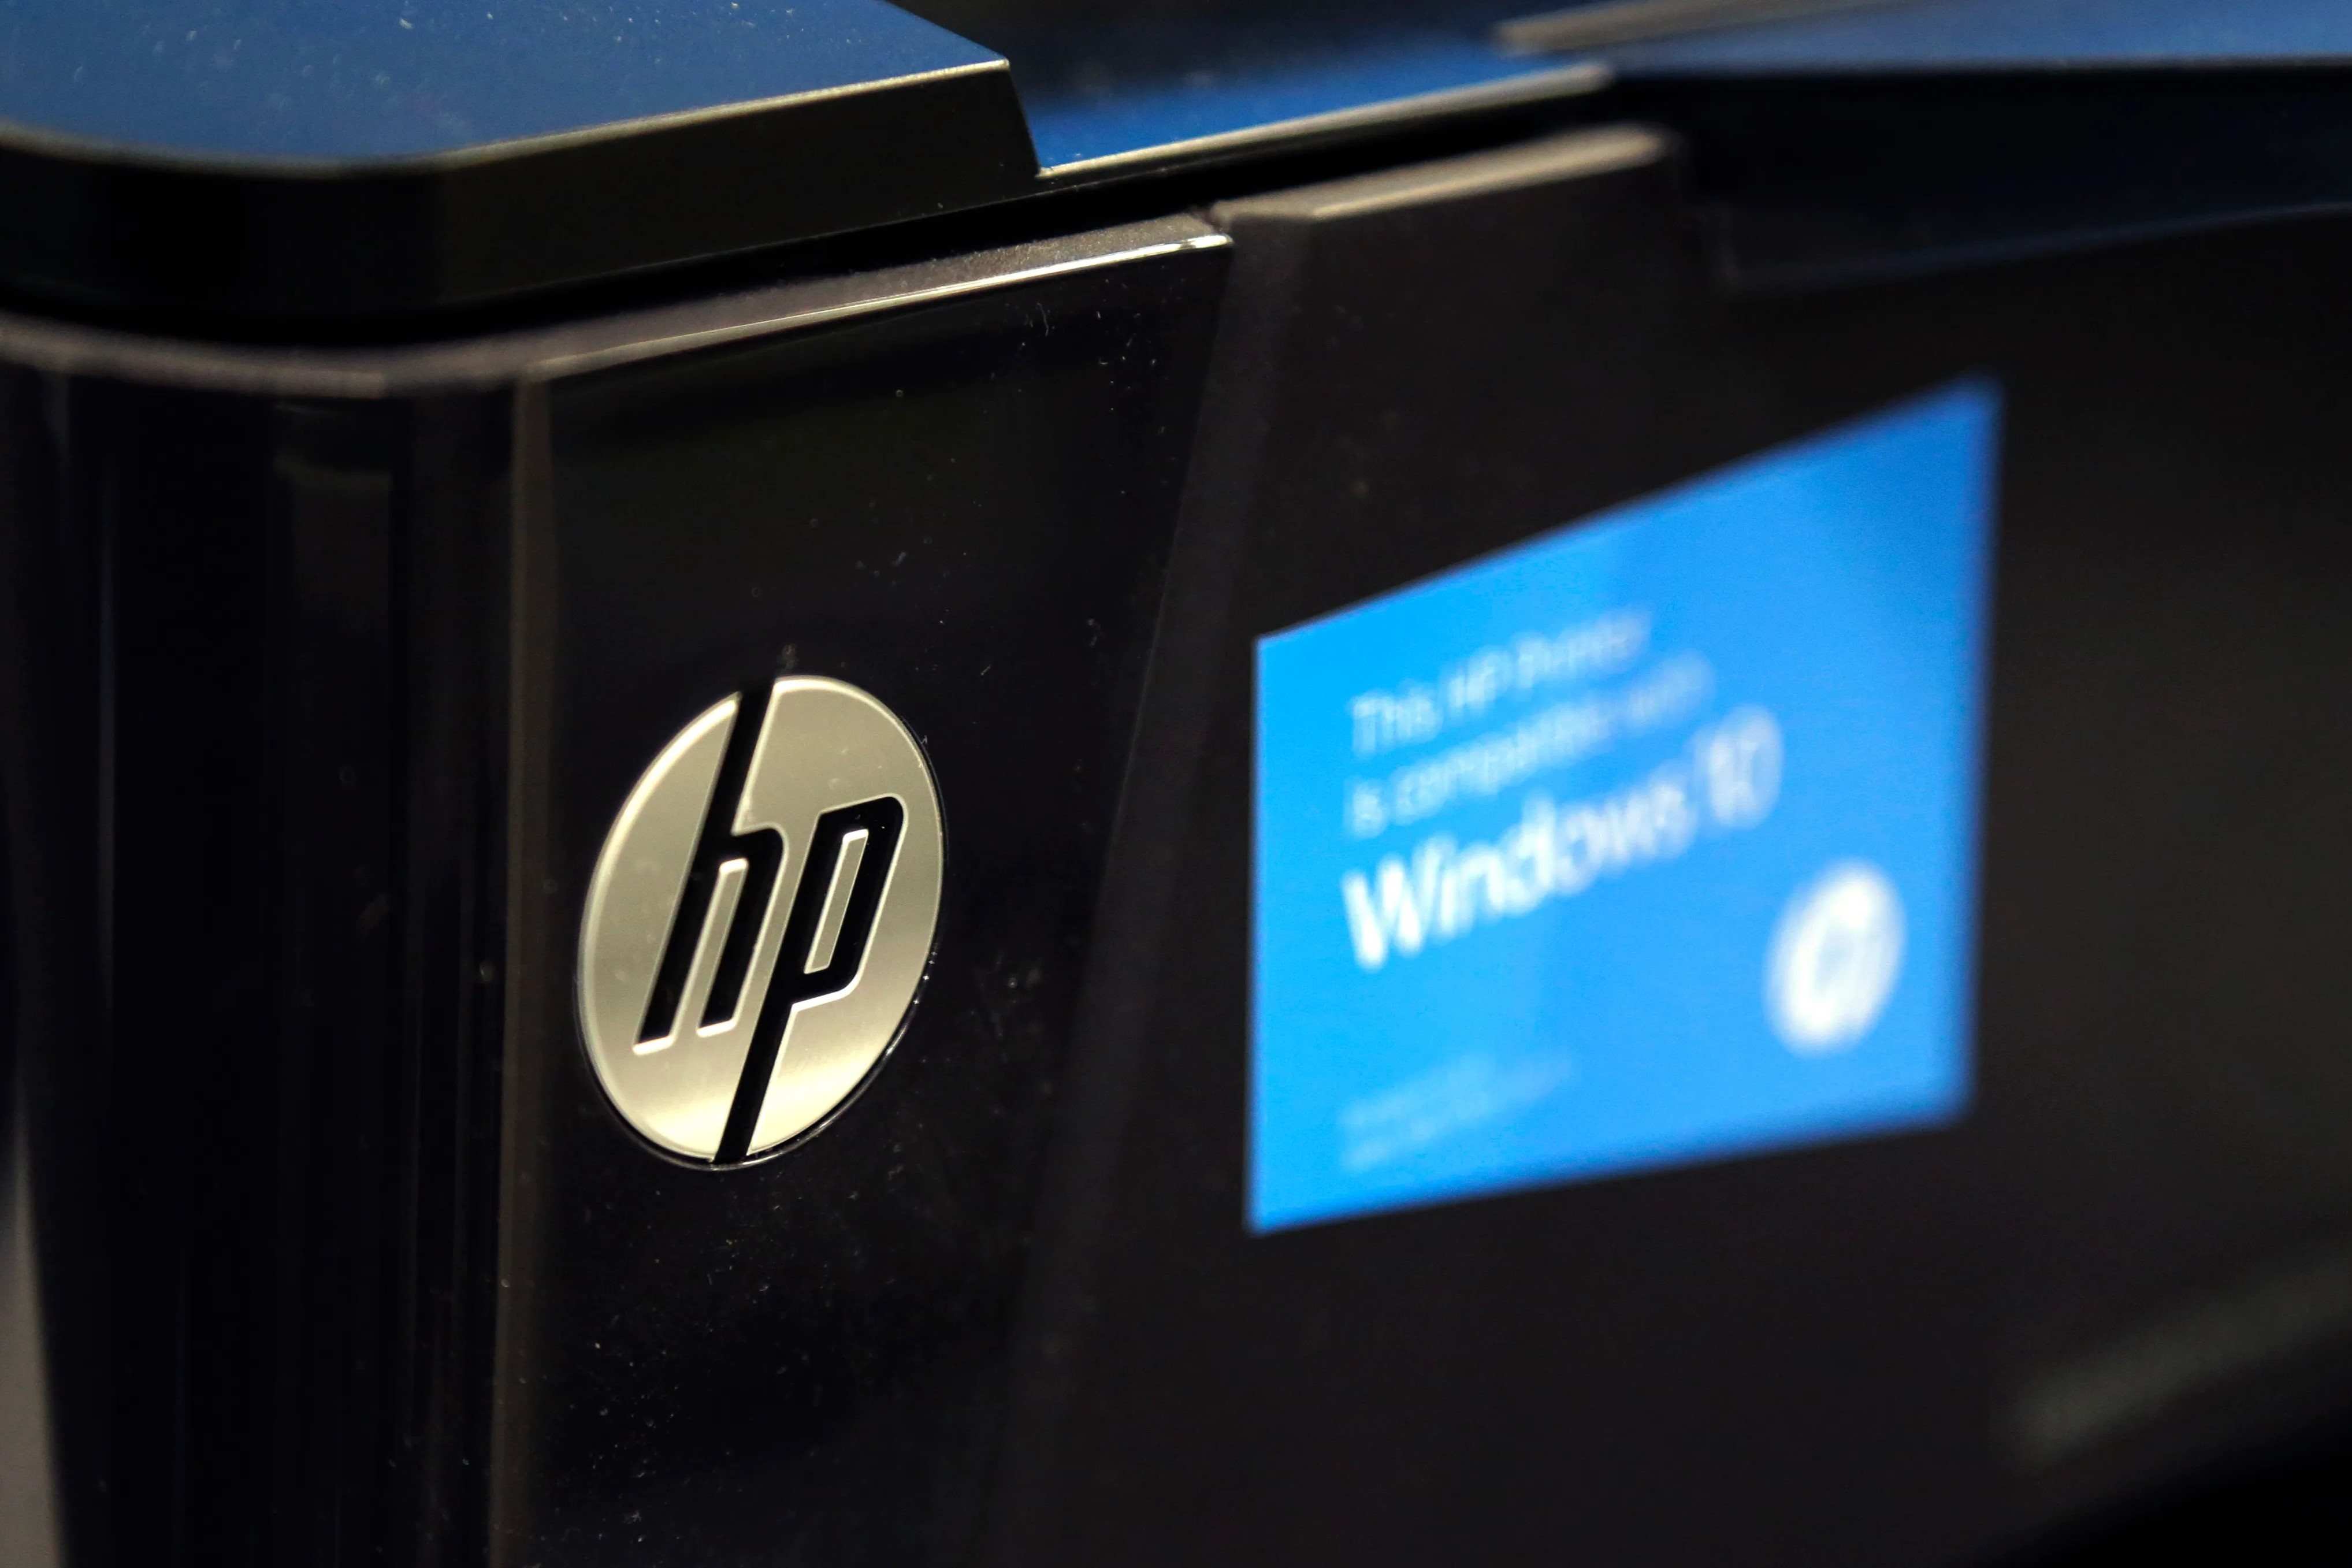 Printer Troubleshooting: Resolving A Blinking Blue Light Issue On An HP Printer